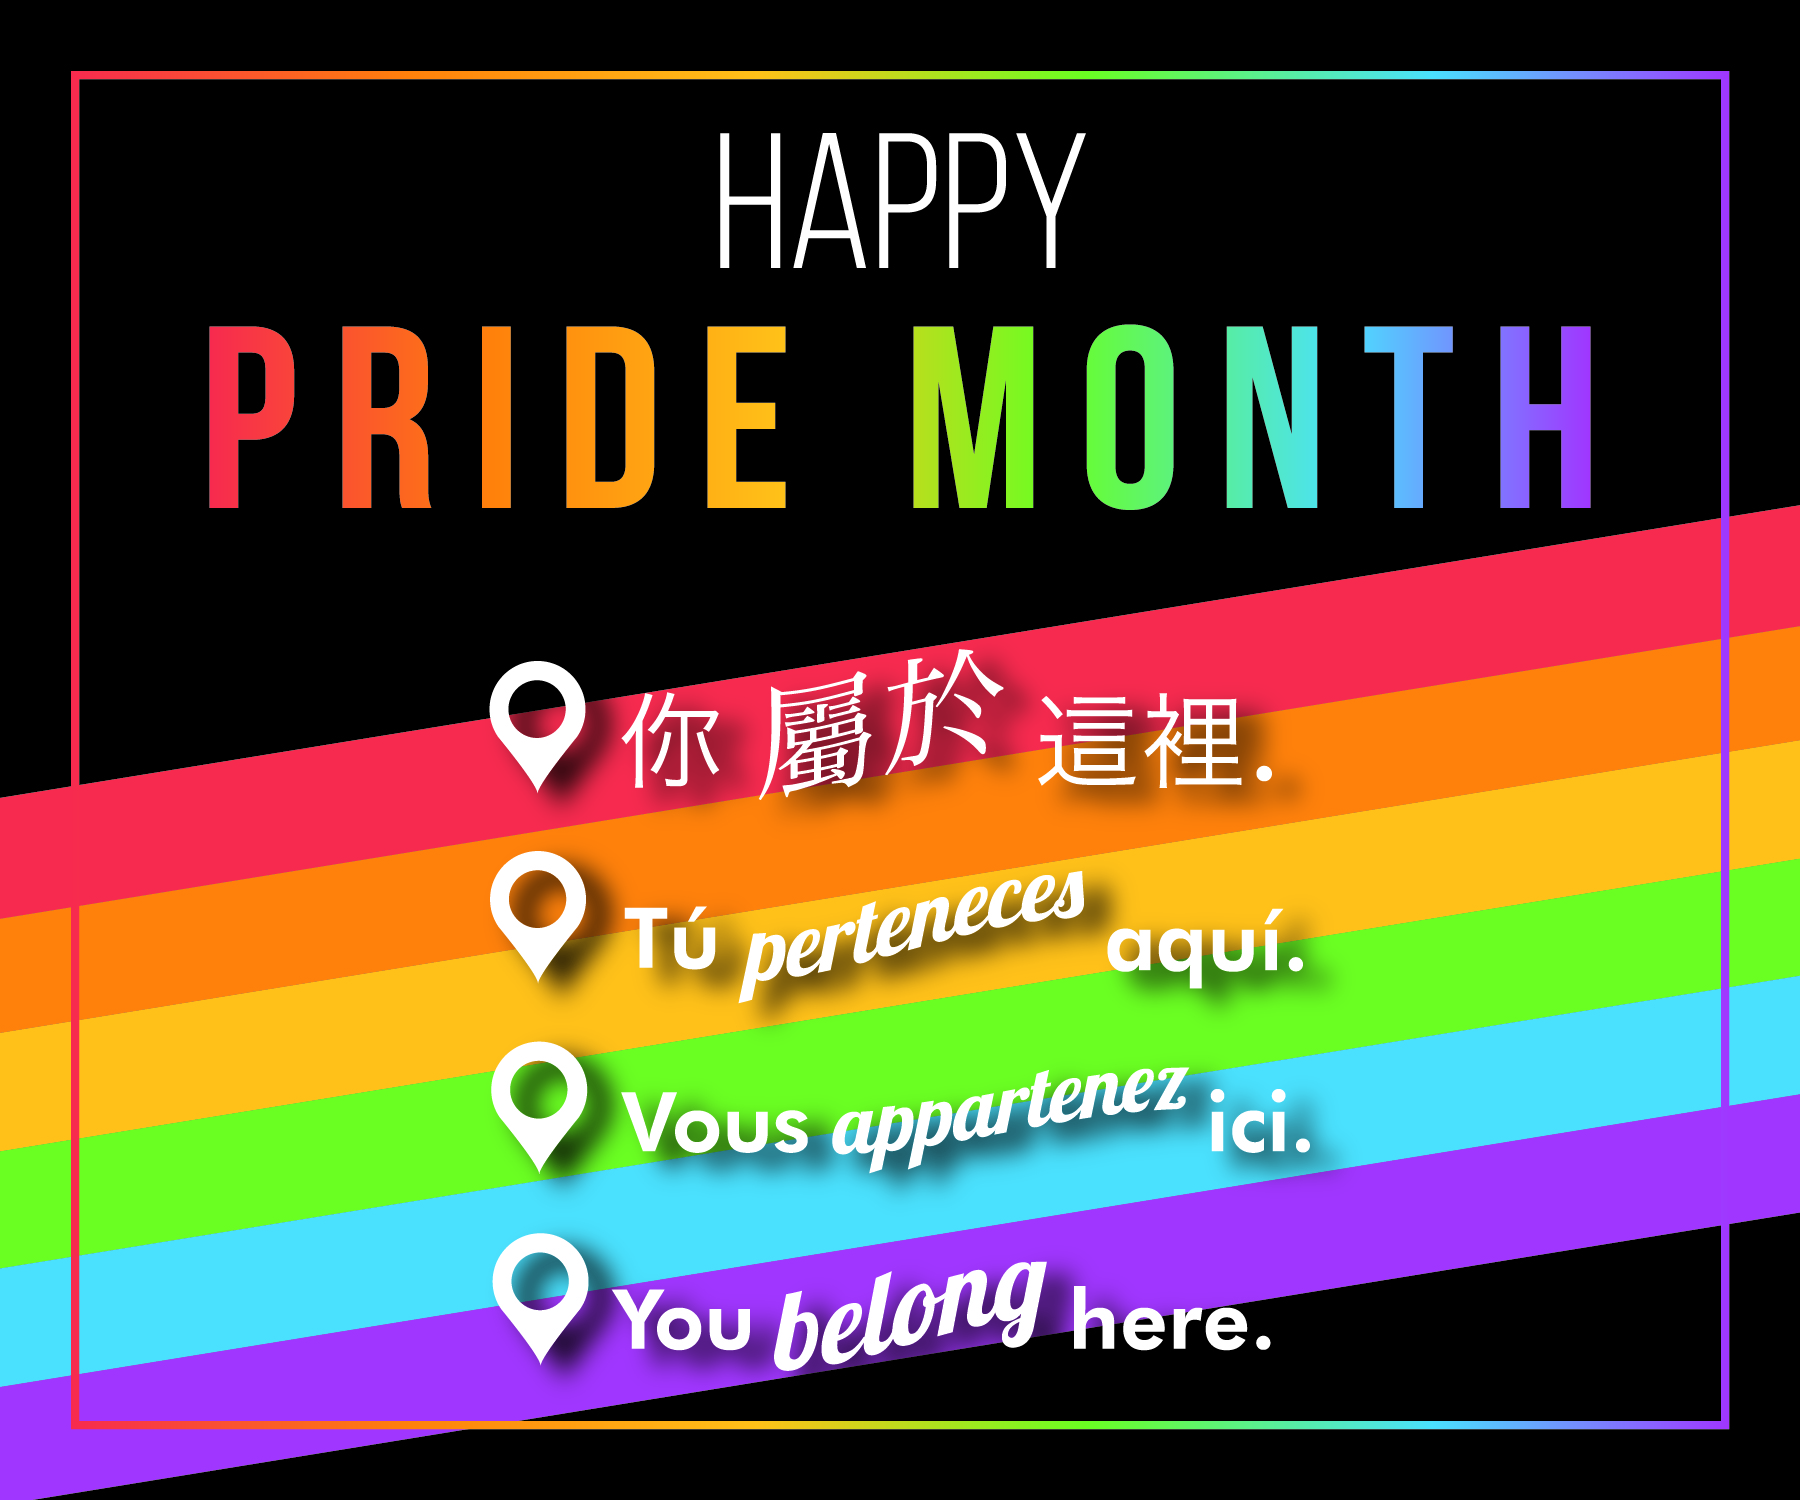 Happy Pride Month Happy Pride Month New Pace Weddings Check Out Amazing Happy Pride Month